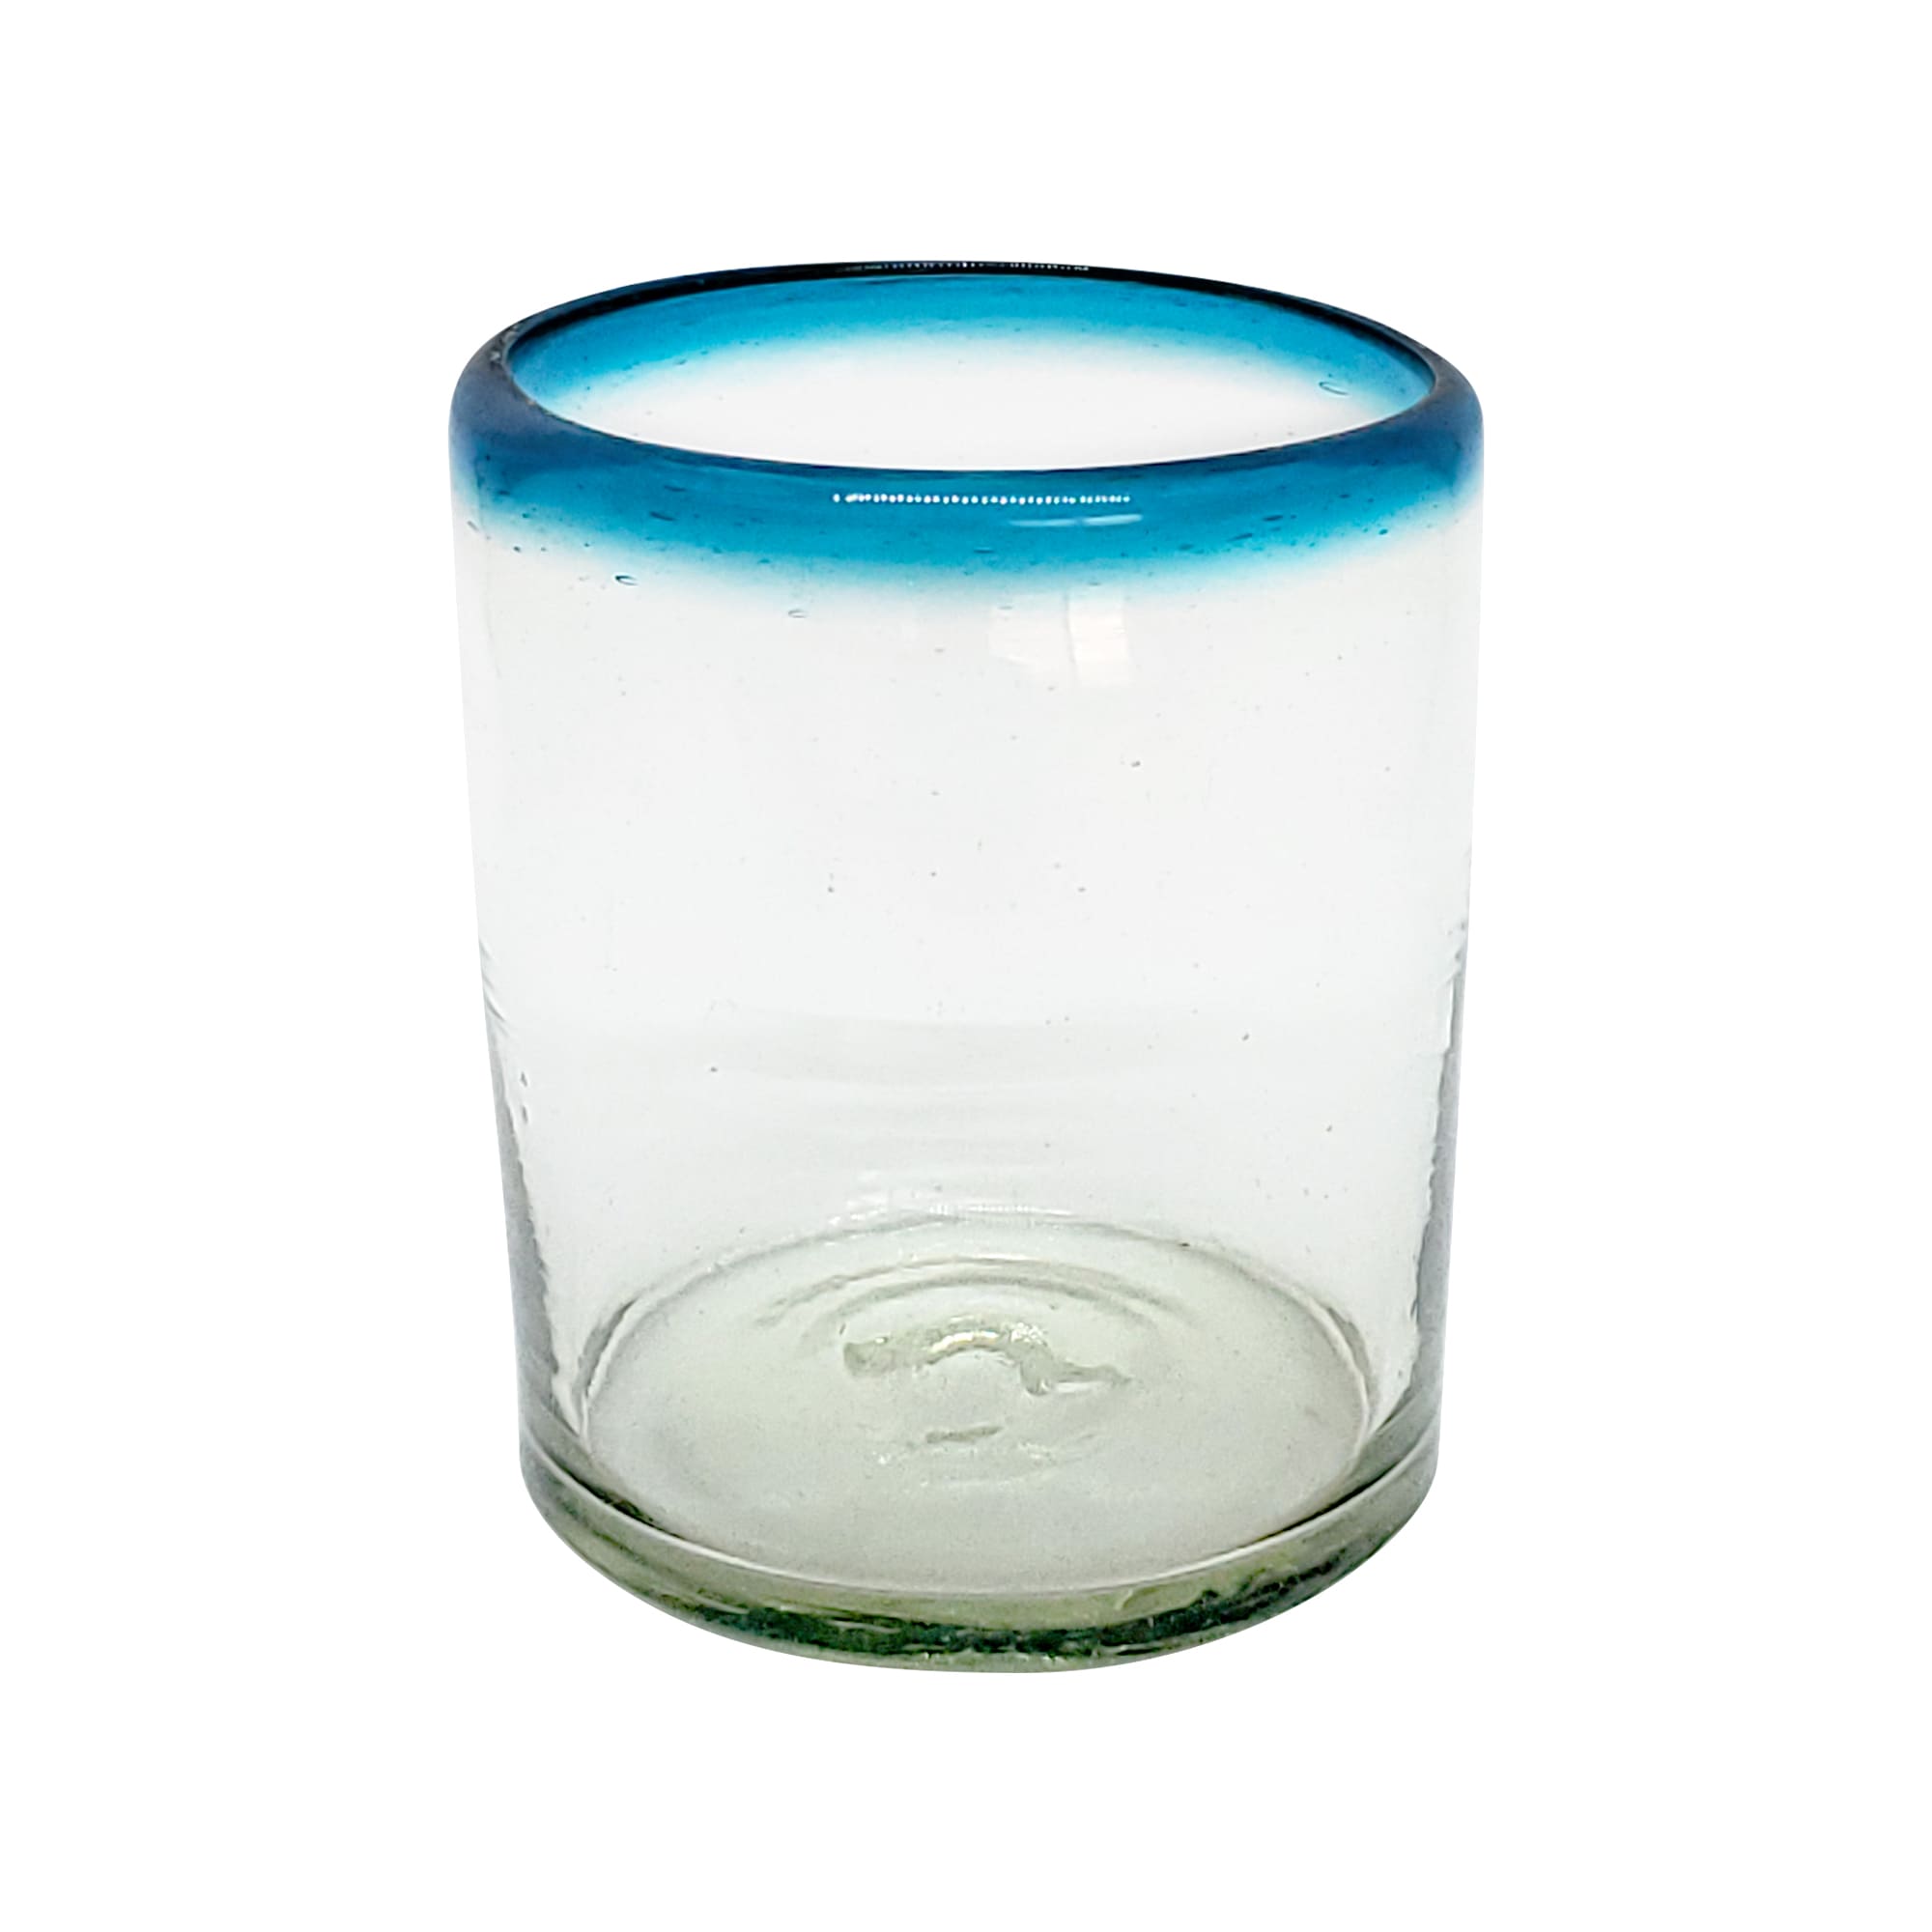 Wholesale Colored Rim Glassware / Aqua Blue Rim 10 oz Tumblers  / These tumblers are a great complement for your pitcher and drinking glasses set.<br>1-Year Product Replacement in case of defects (glasses broken in dishwasher is considered a defect).